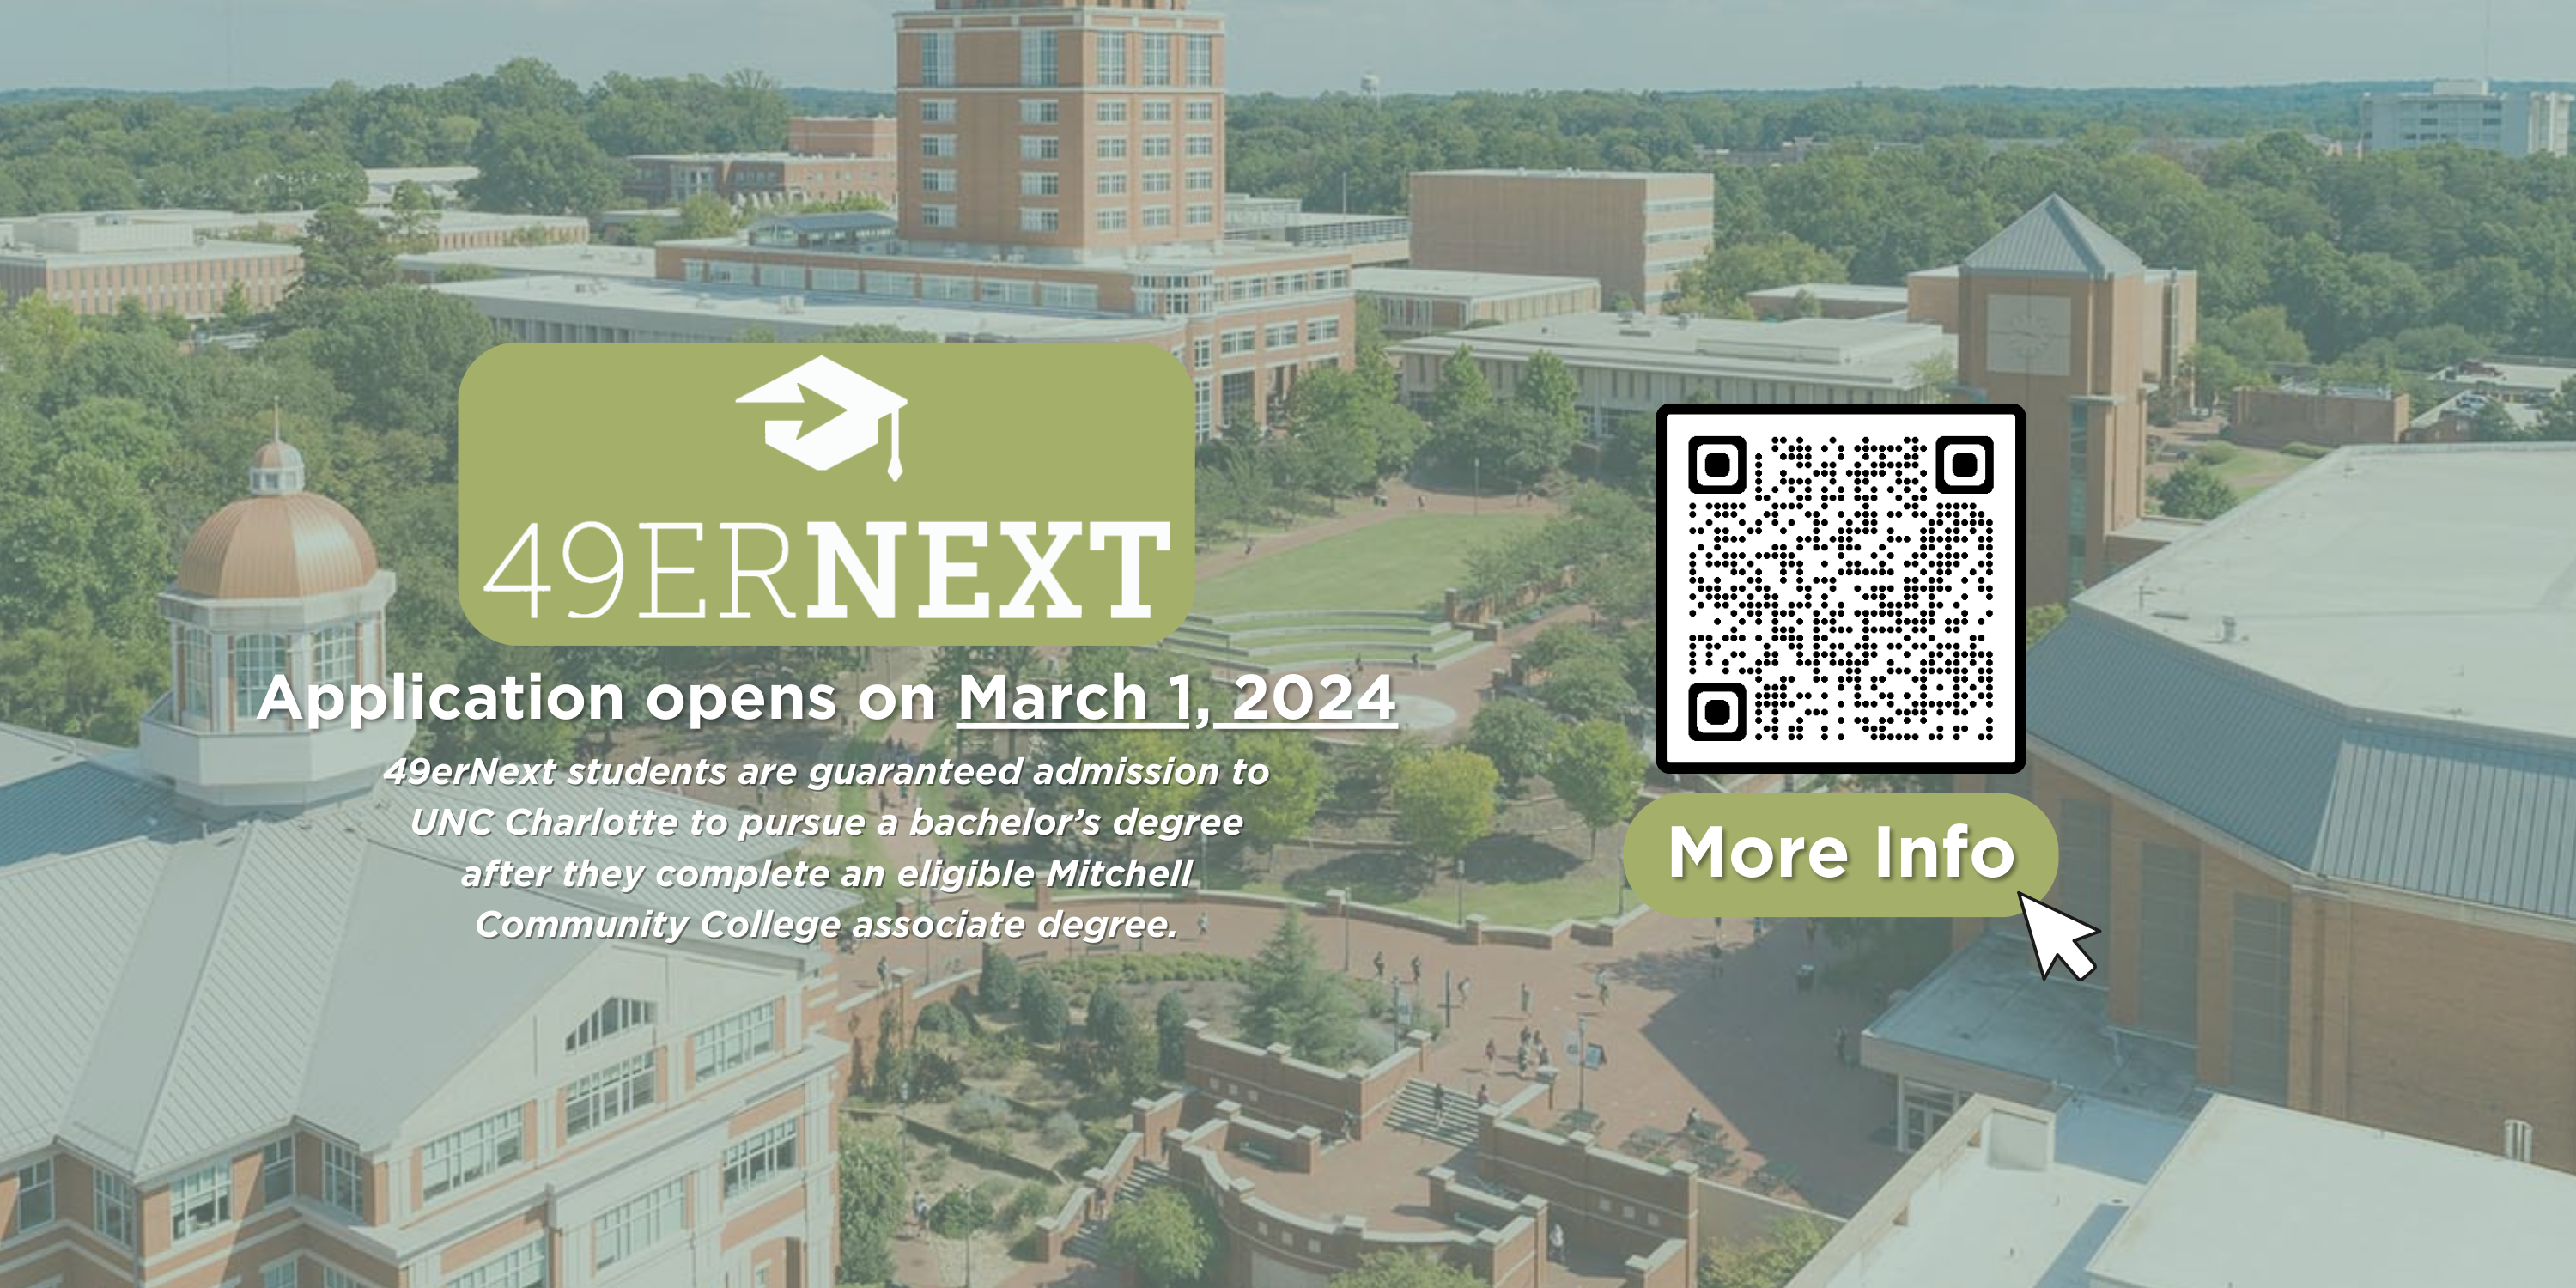 Banner that reads "49erNext | Application opens on March 1, 2024 - 49erNext students are guaranteed admission to UNC Charlotte to pursue a bachelor's degree after they complete an eligible Mitchell Community College associate degree.". Click the banner for more info.